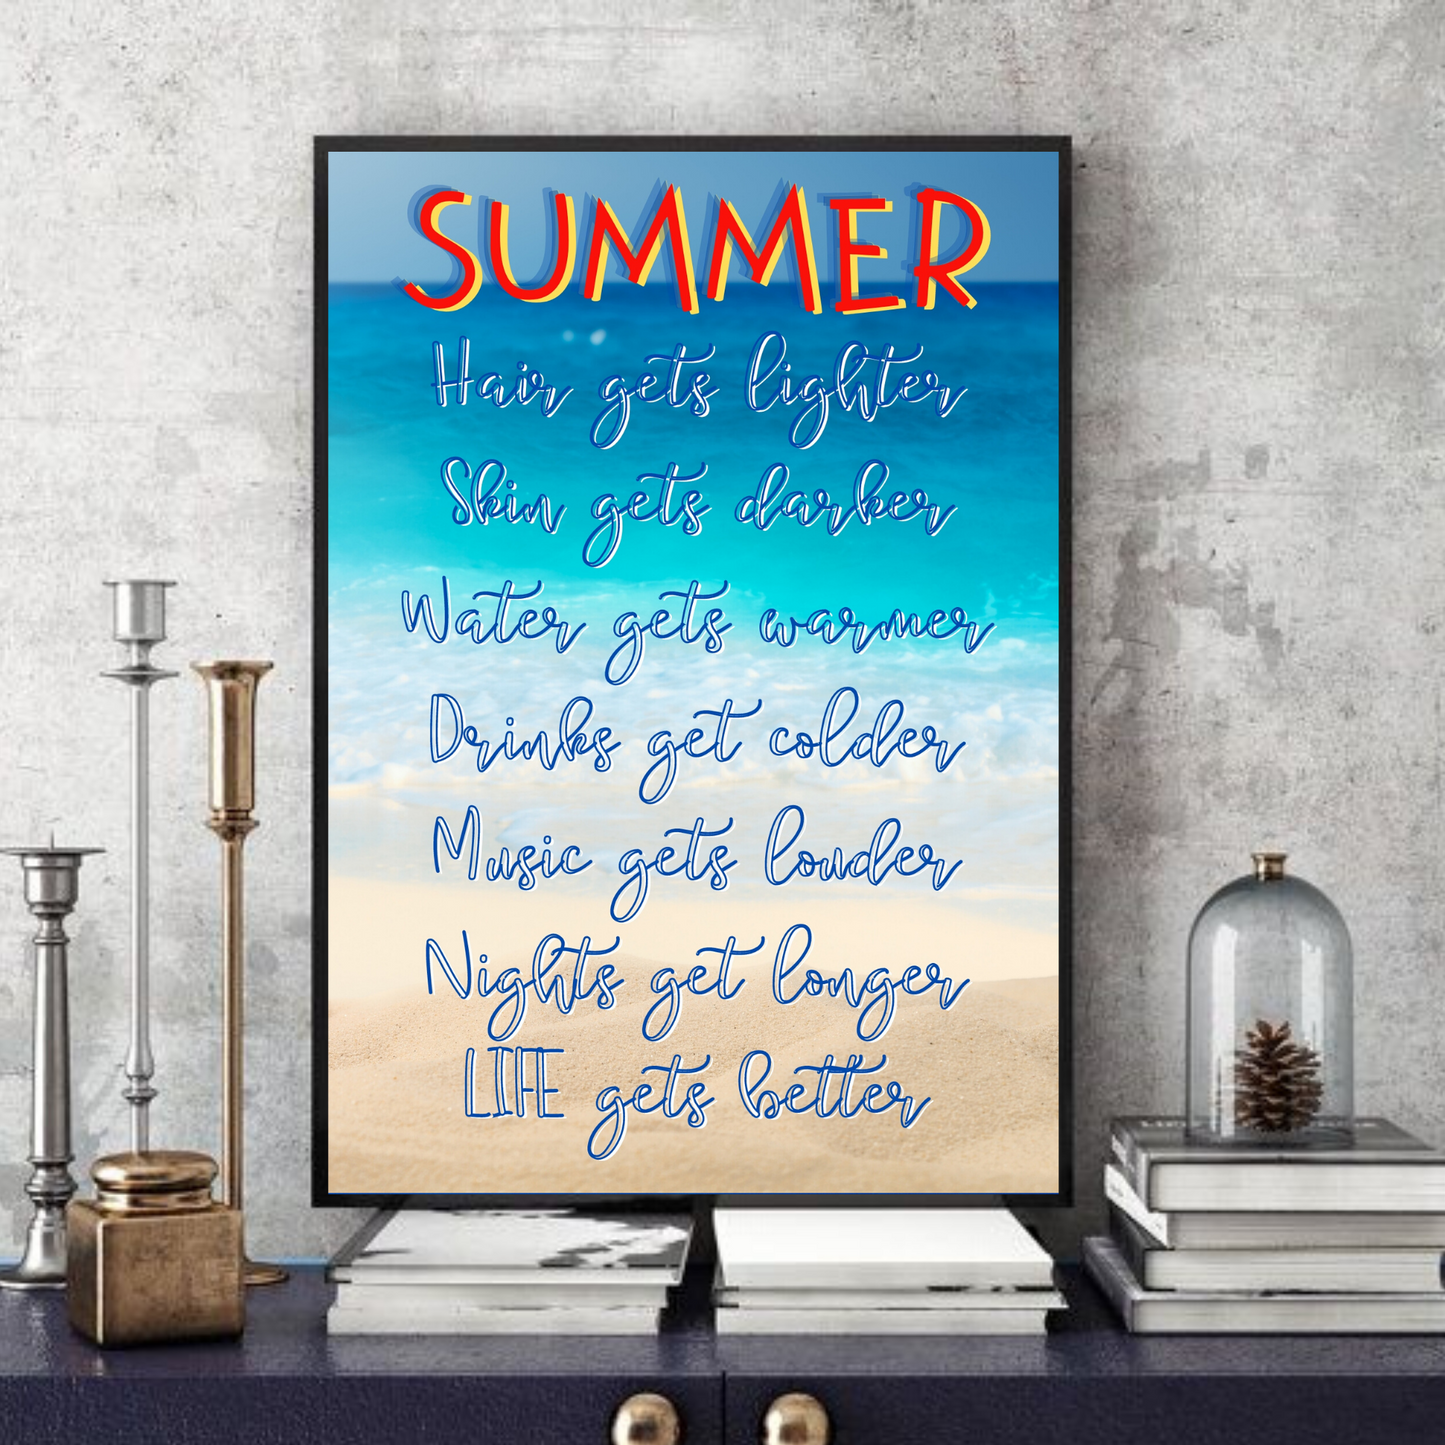 Summer (1.0) Life gets better -  Typographic Wall Art